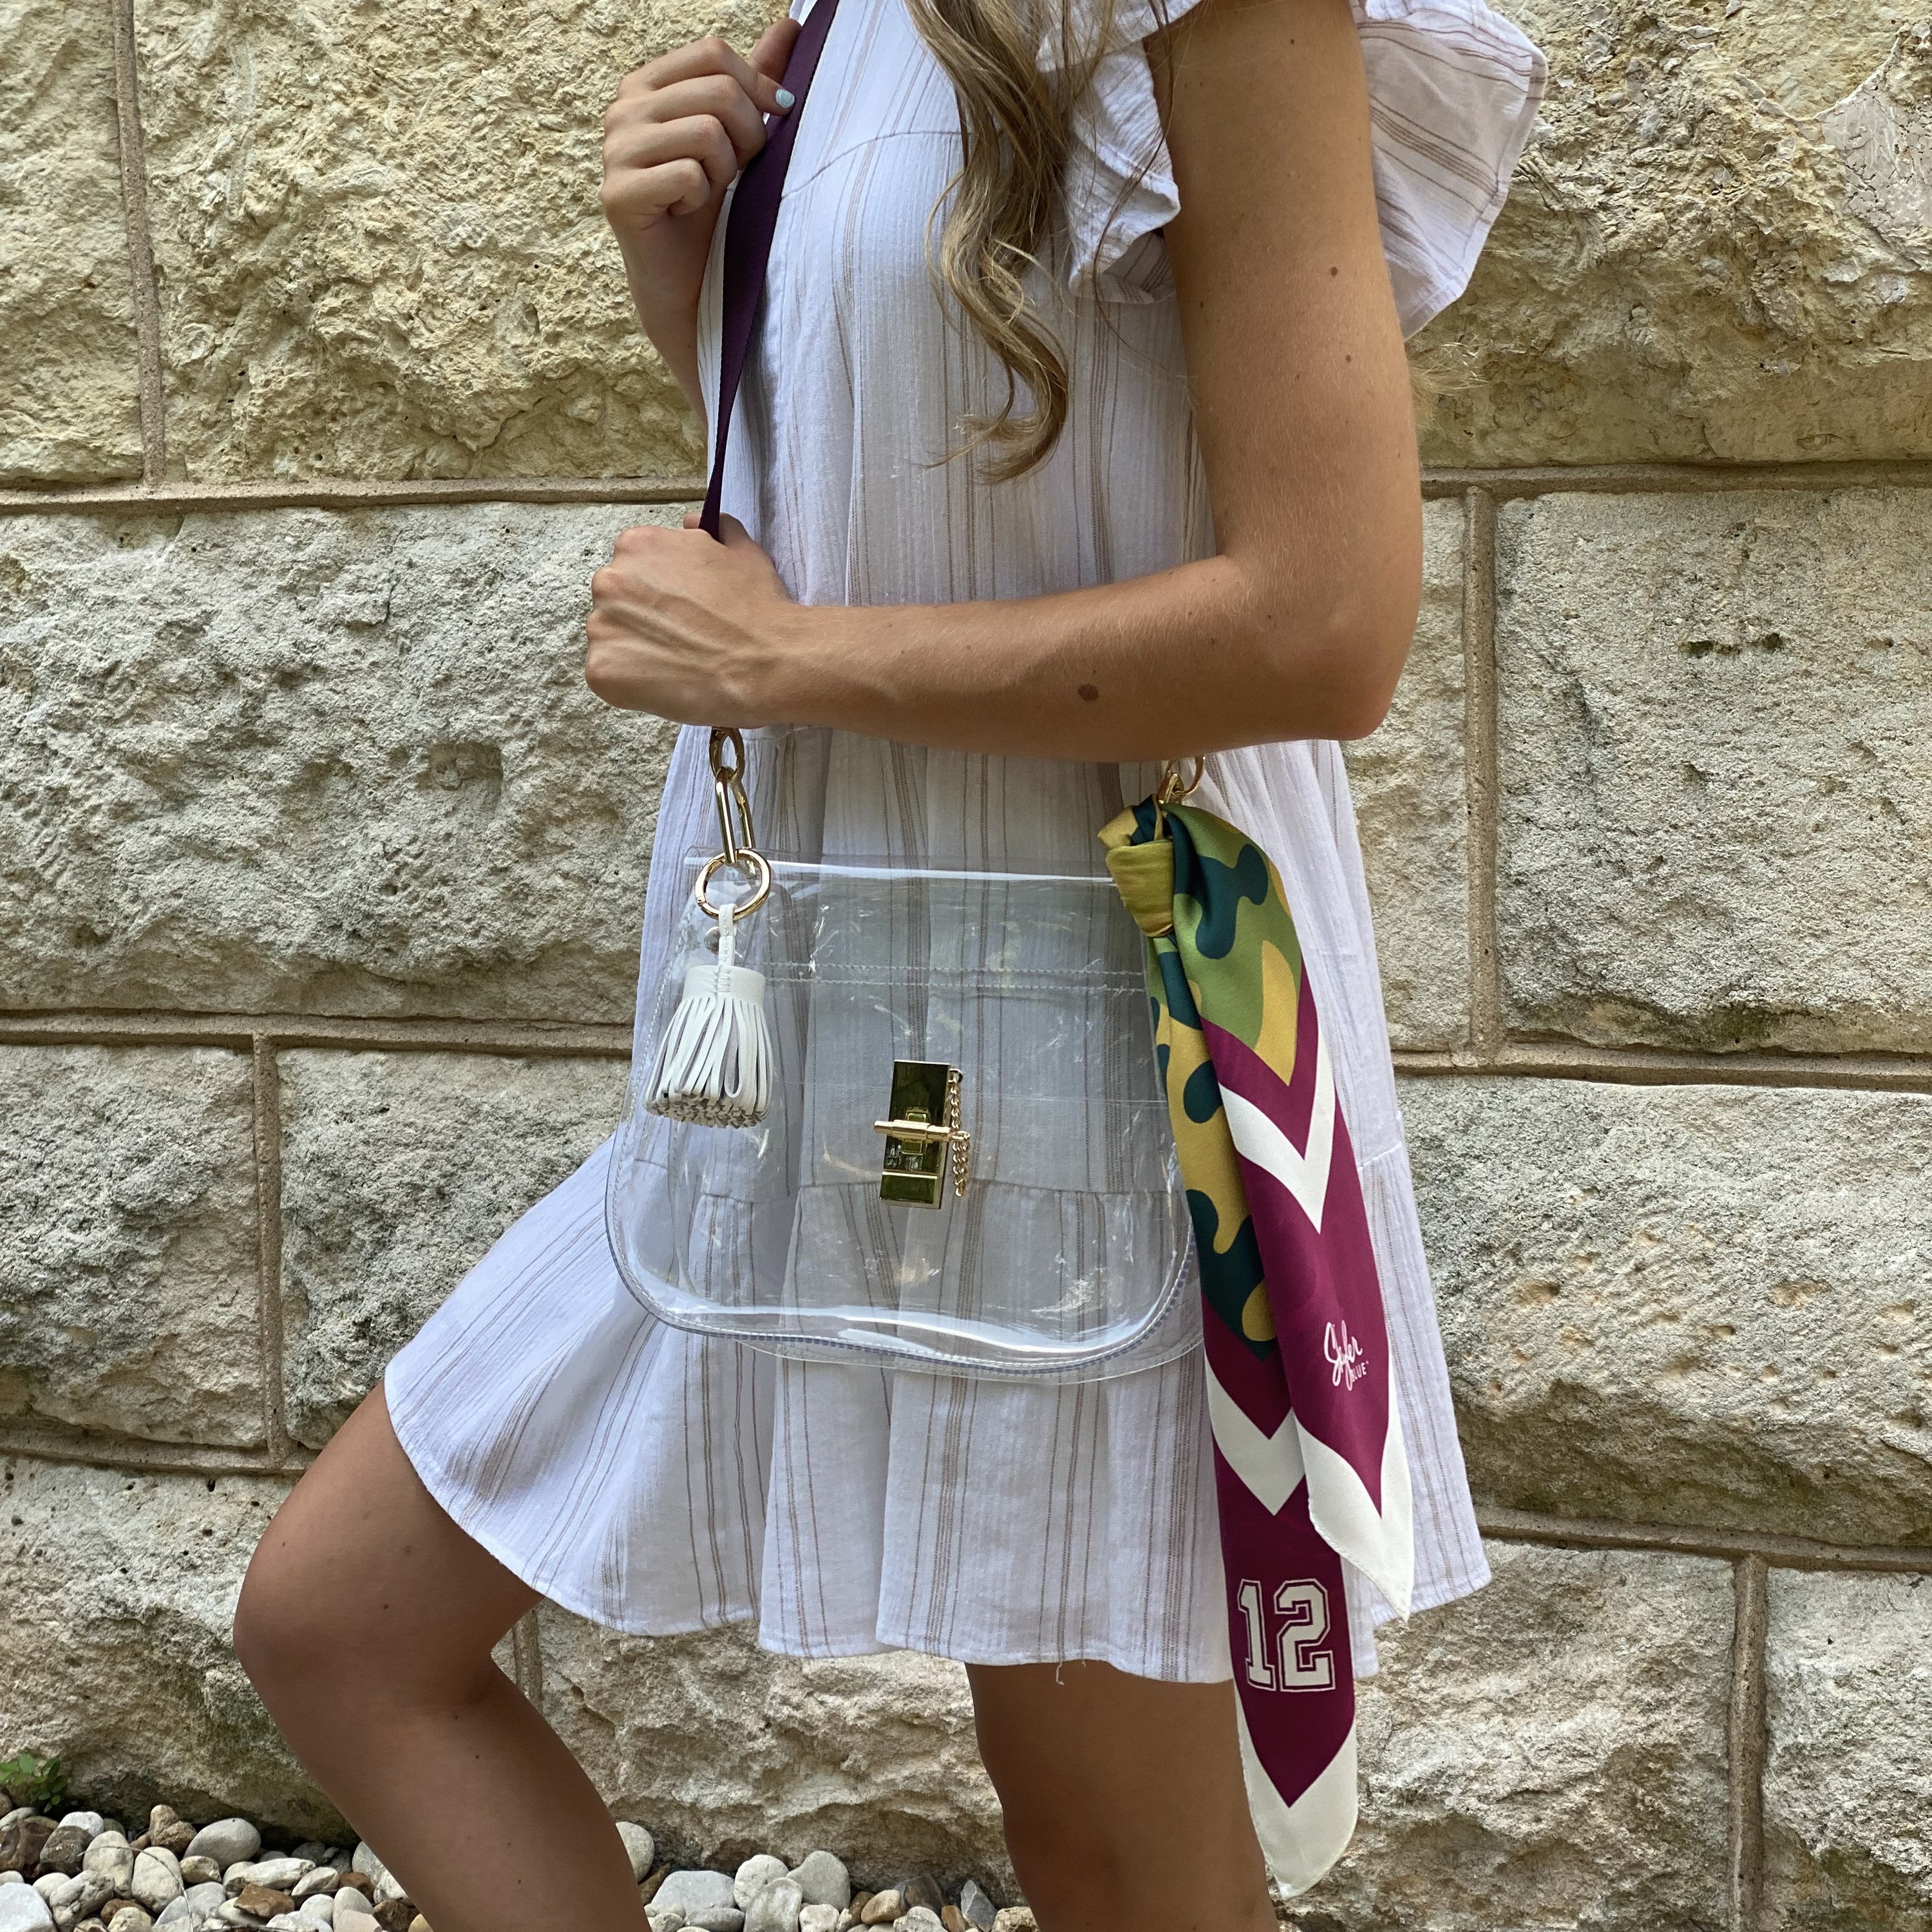 Skyler Blue’s The College Station Medium Saddle Clear Bag stadium approved clear bag / clear purse including adjustable, nylon webbing shoulder or crossbody strap with herringbone weave and gold hardware, 60-centimeter 100% silk twill scarf, and 100% genuine leather tassel. 